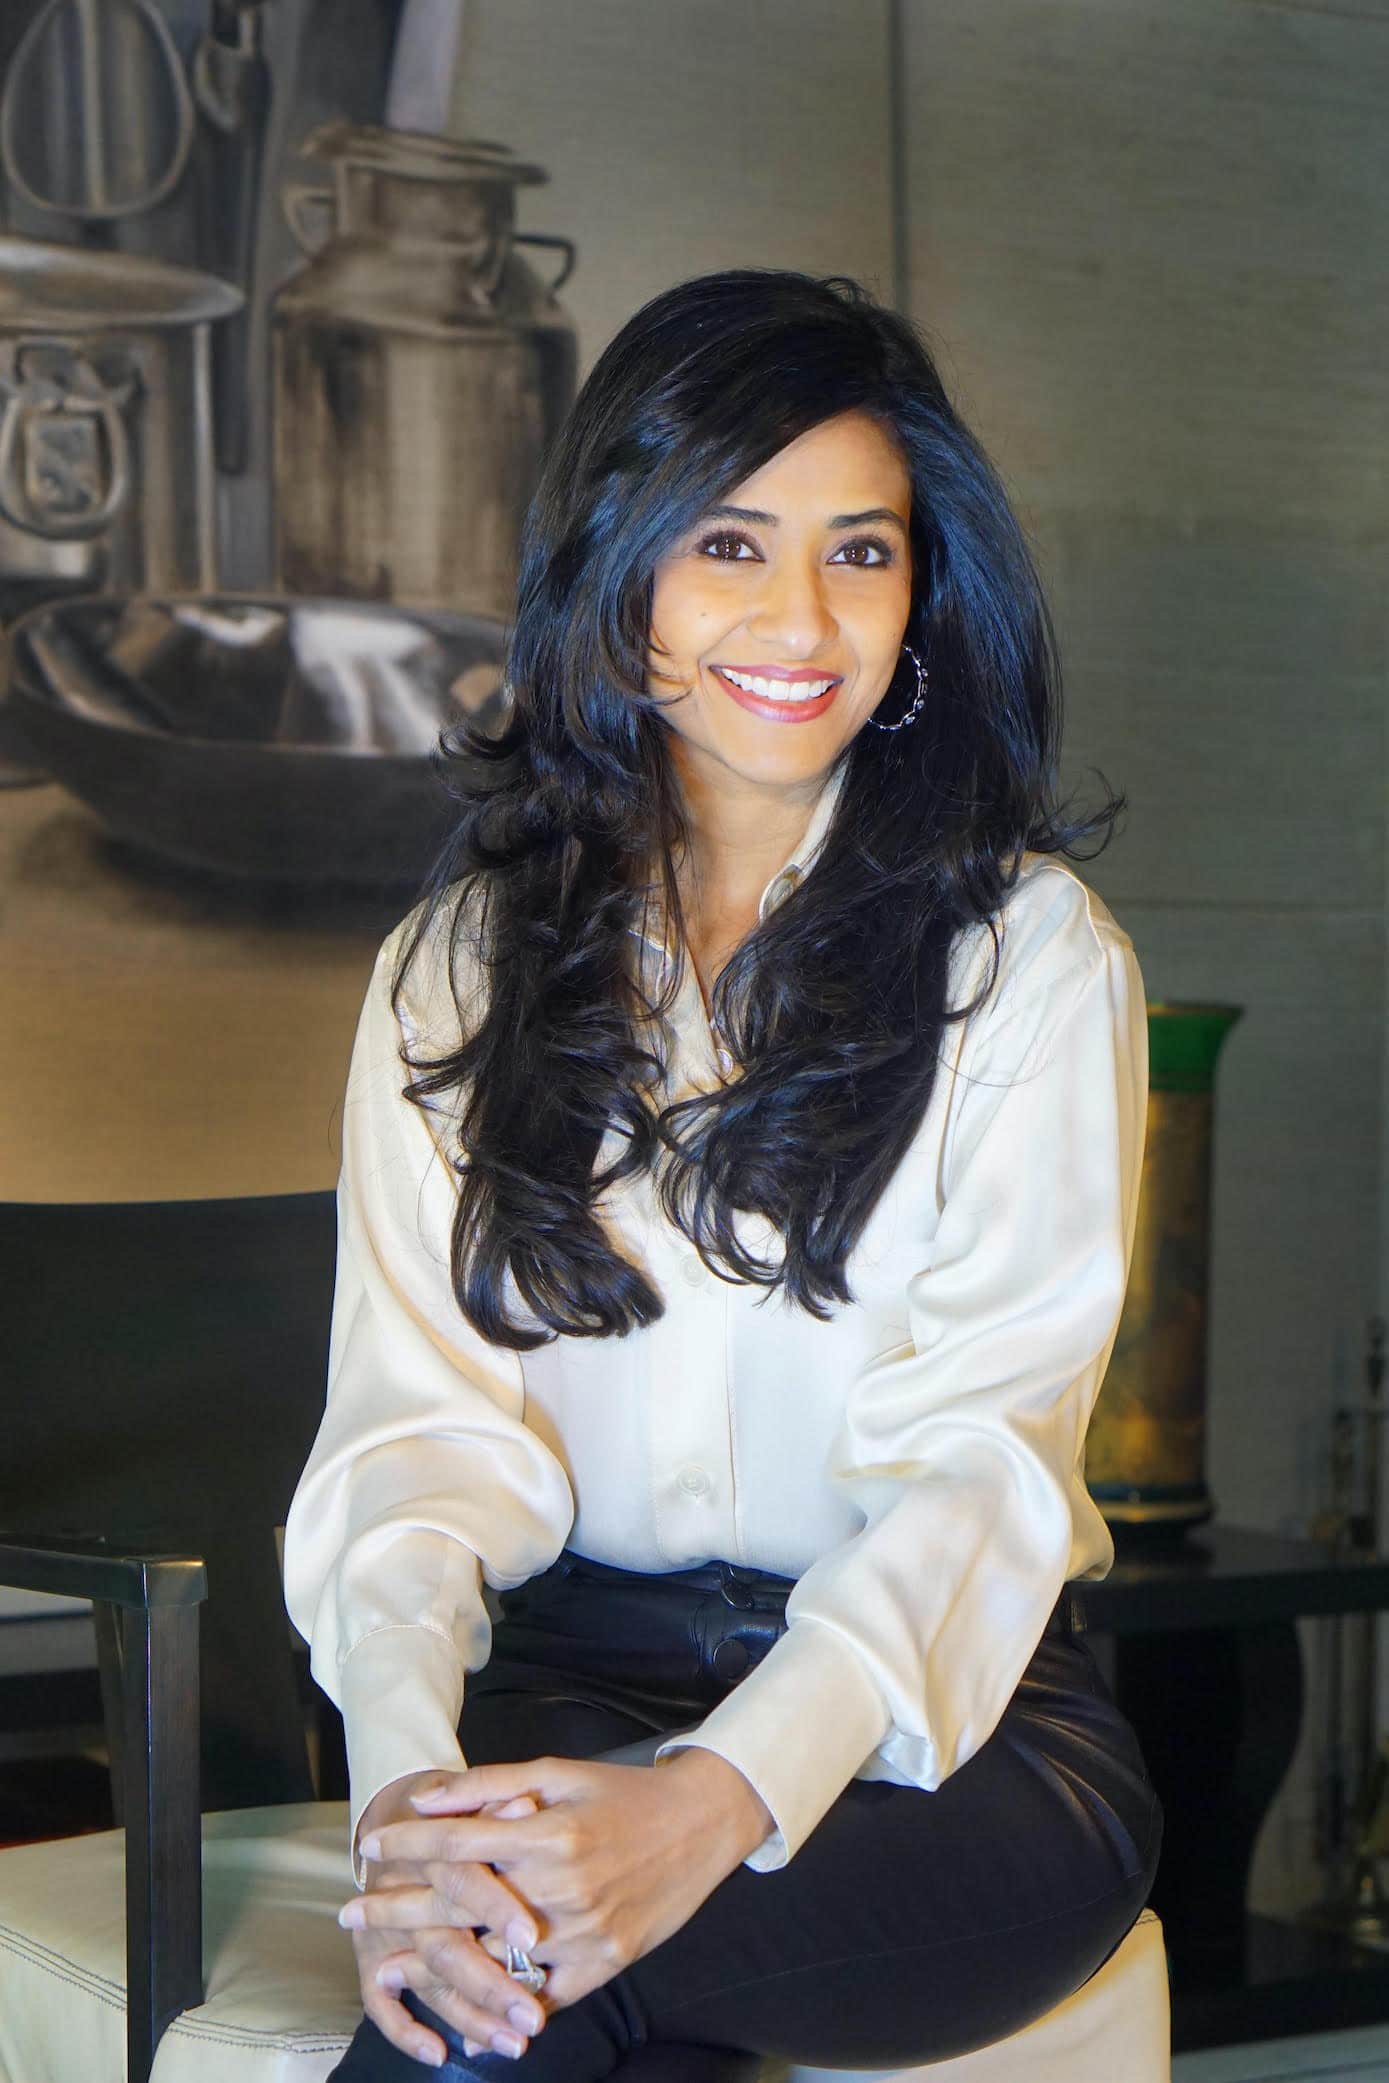 Aparajita Jain, founder of Terrain.art, India's first blockchain-powered online platform in the art market, says India will see a great growth in the art market.